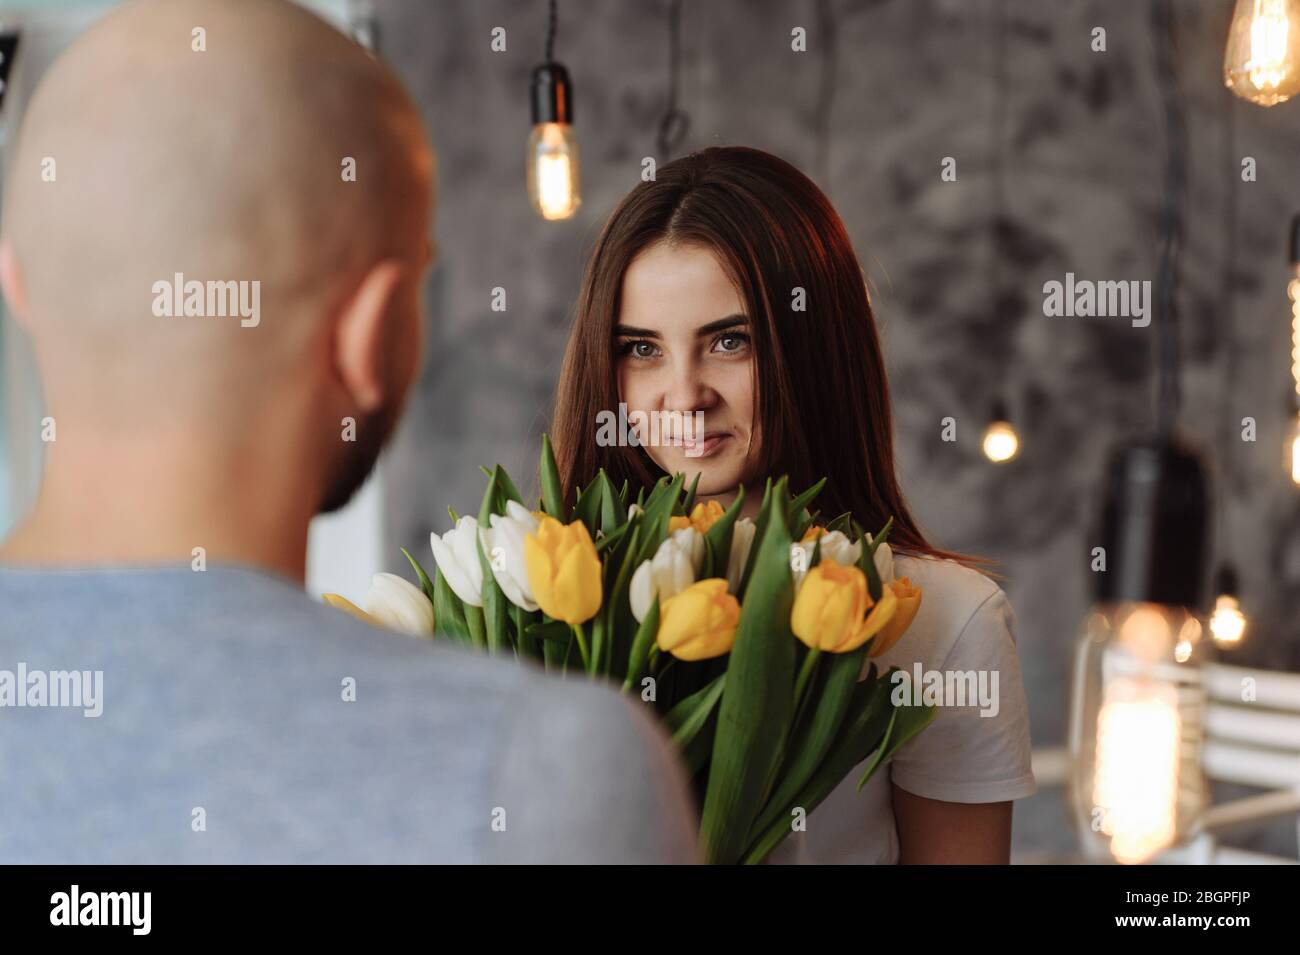 Man giving a bouquet of tulips to the smiling girl Stock Photo